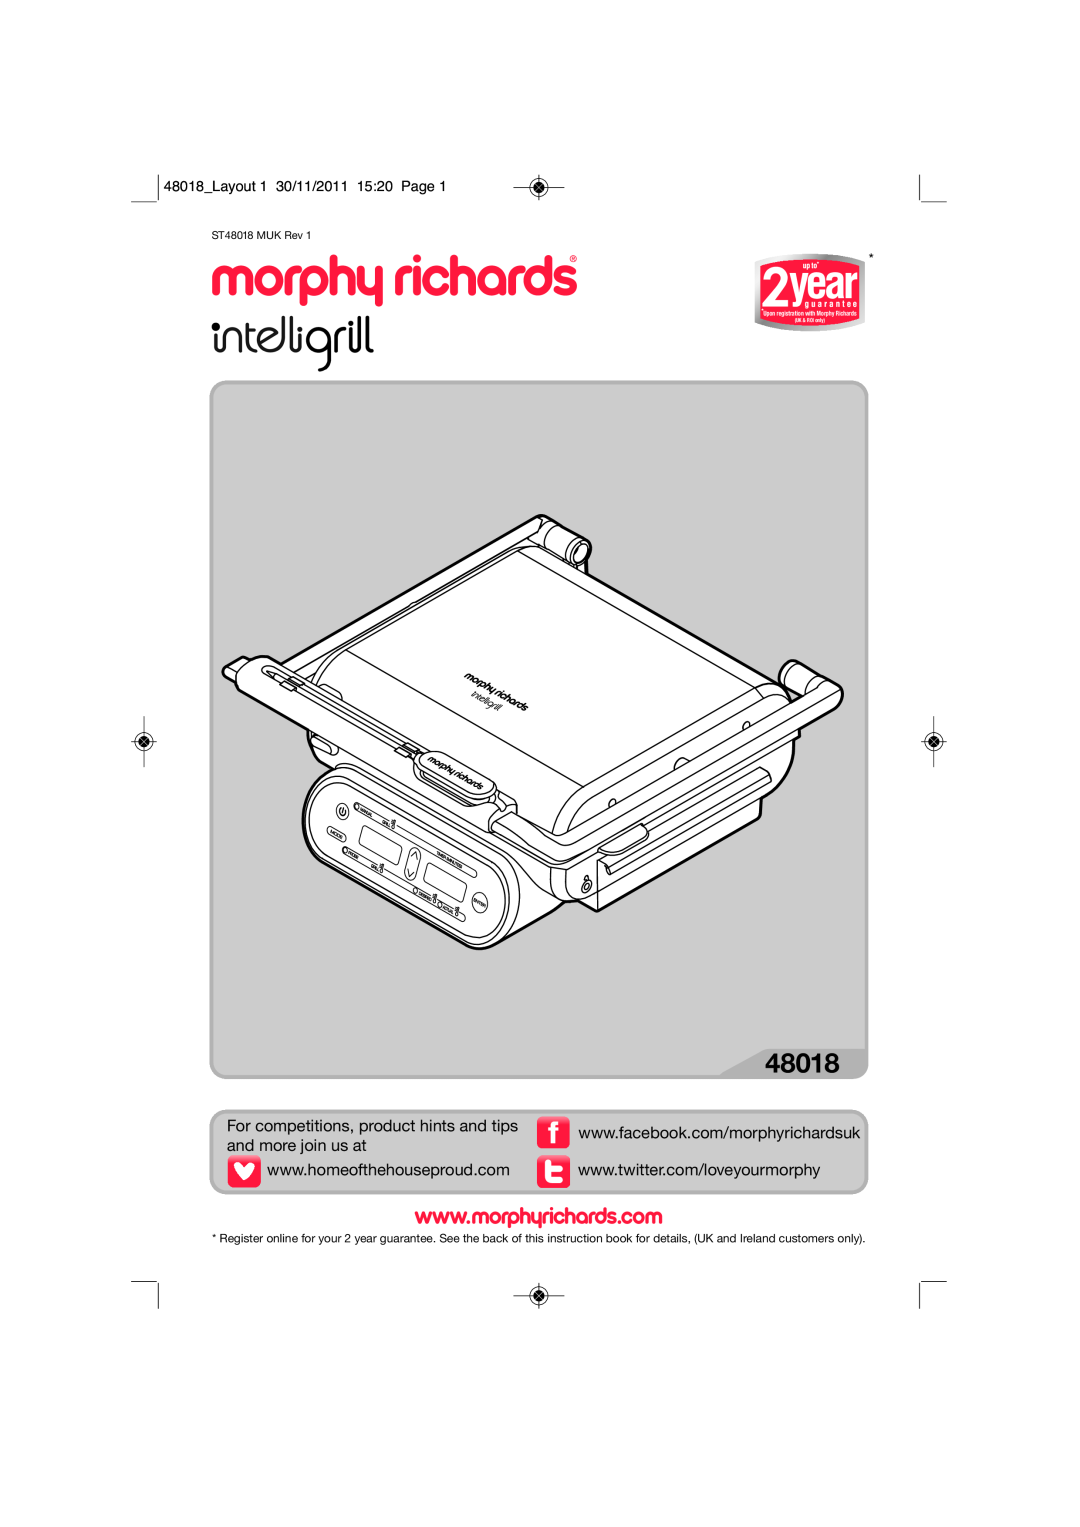 Morphy Richards ST48018 MUK Rev 1 manual Layout 1 30/11/2011 15 20 Page, Upon registration with Morphy Richards, Minutes 